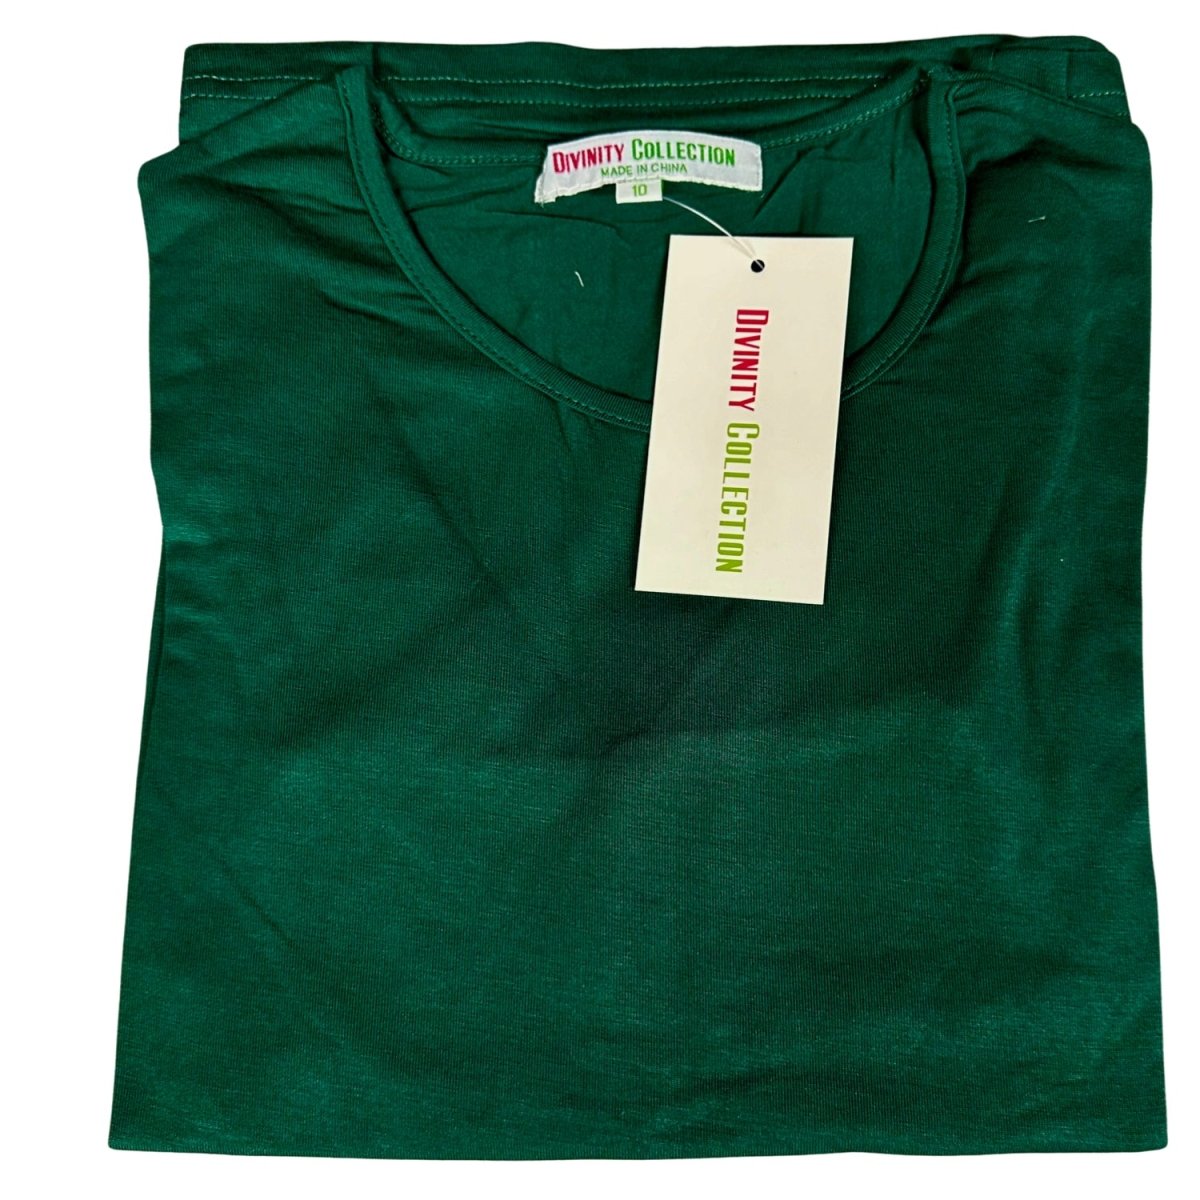 Dark Green Long Sleeve Cotton Body Top - Divinity Collection